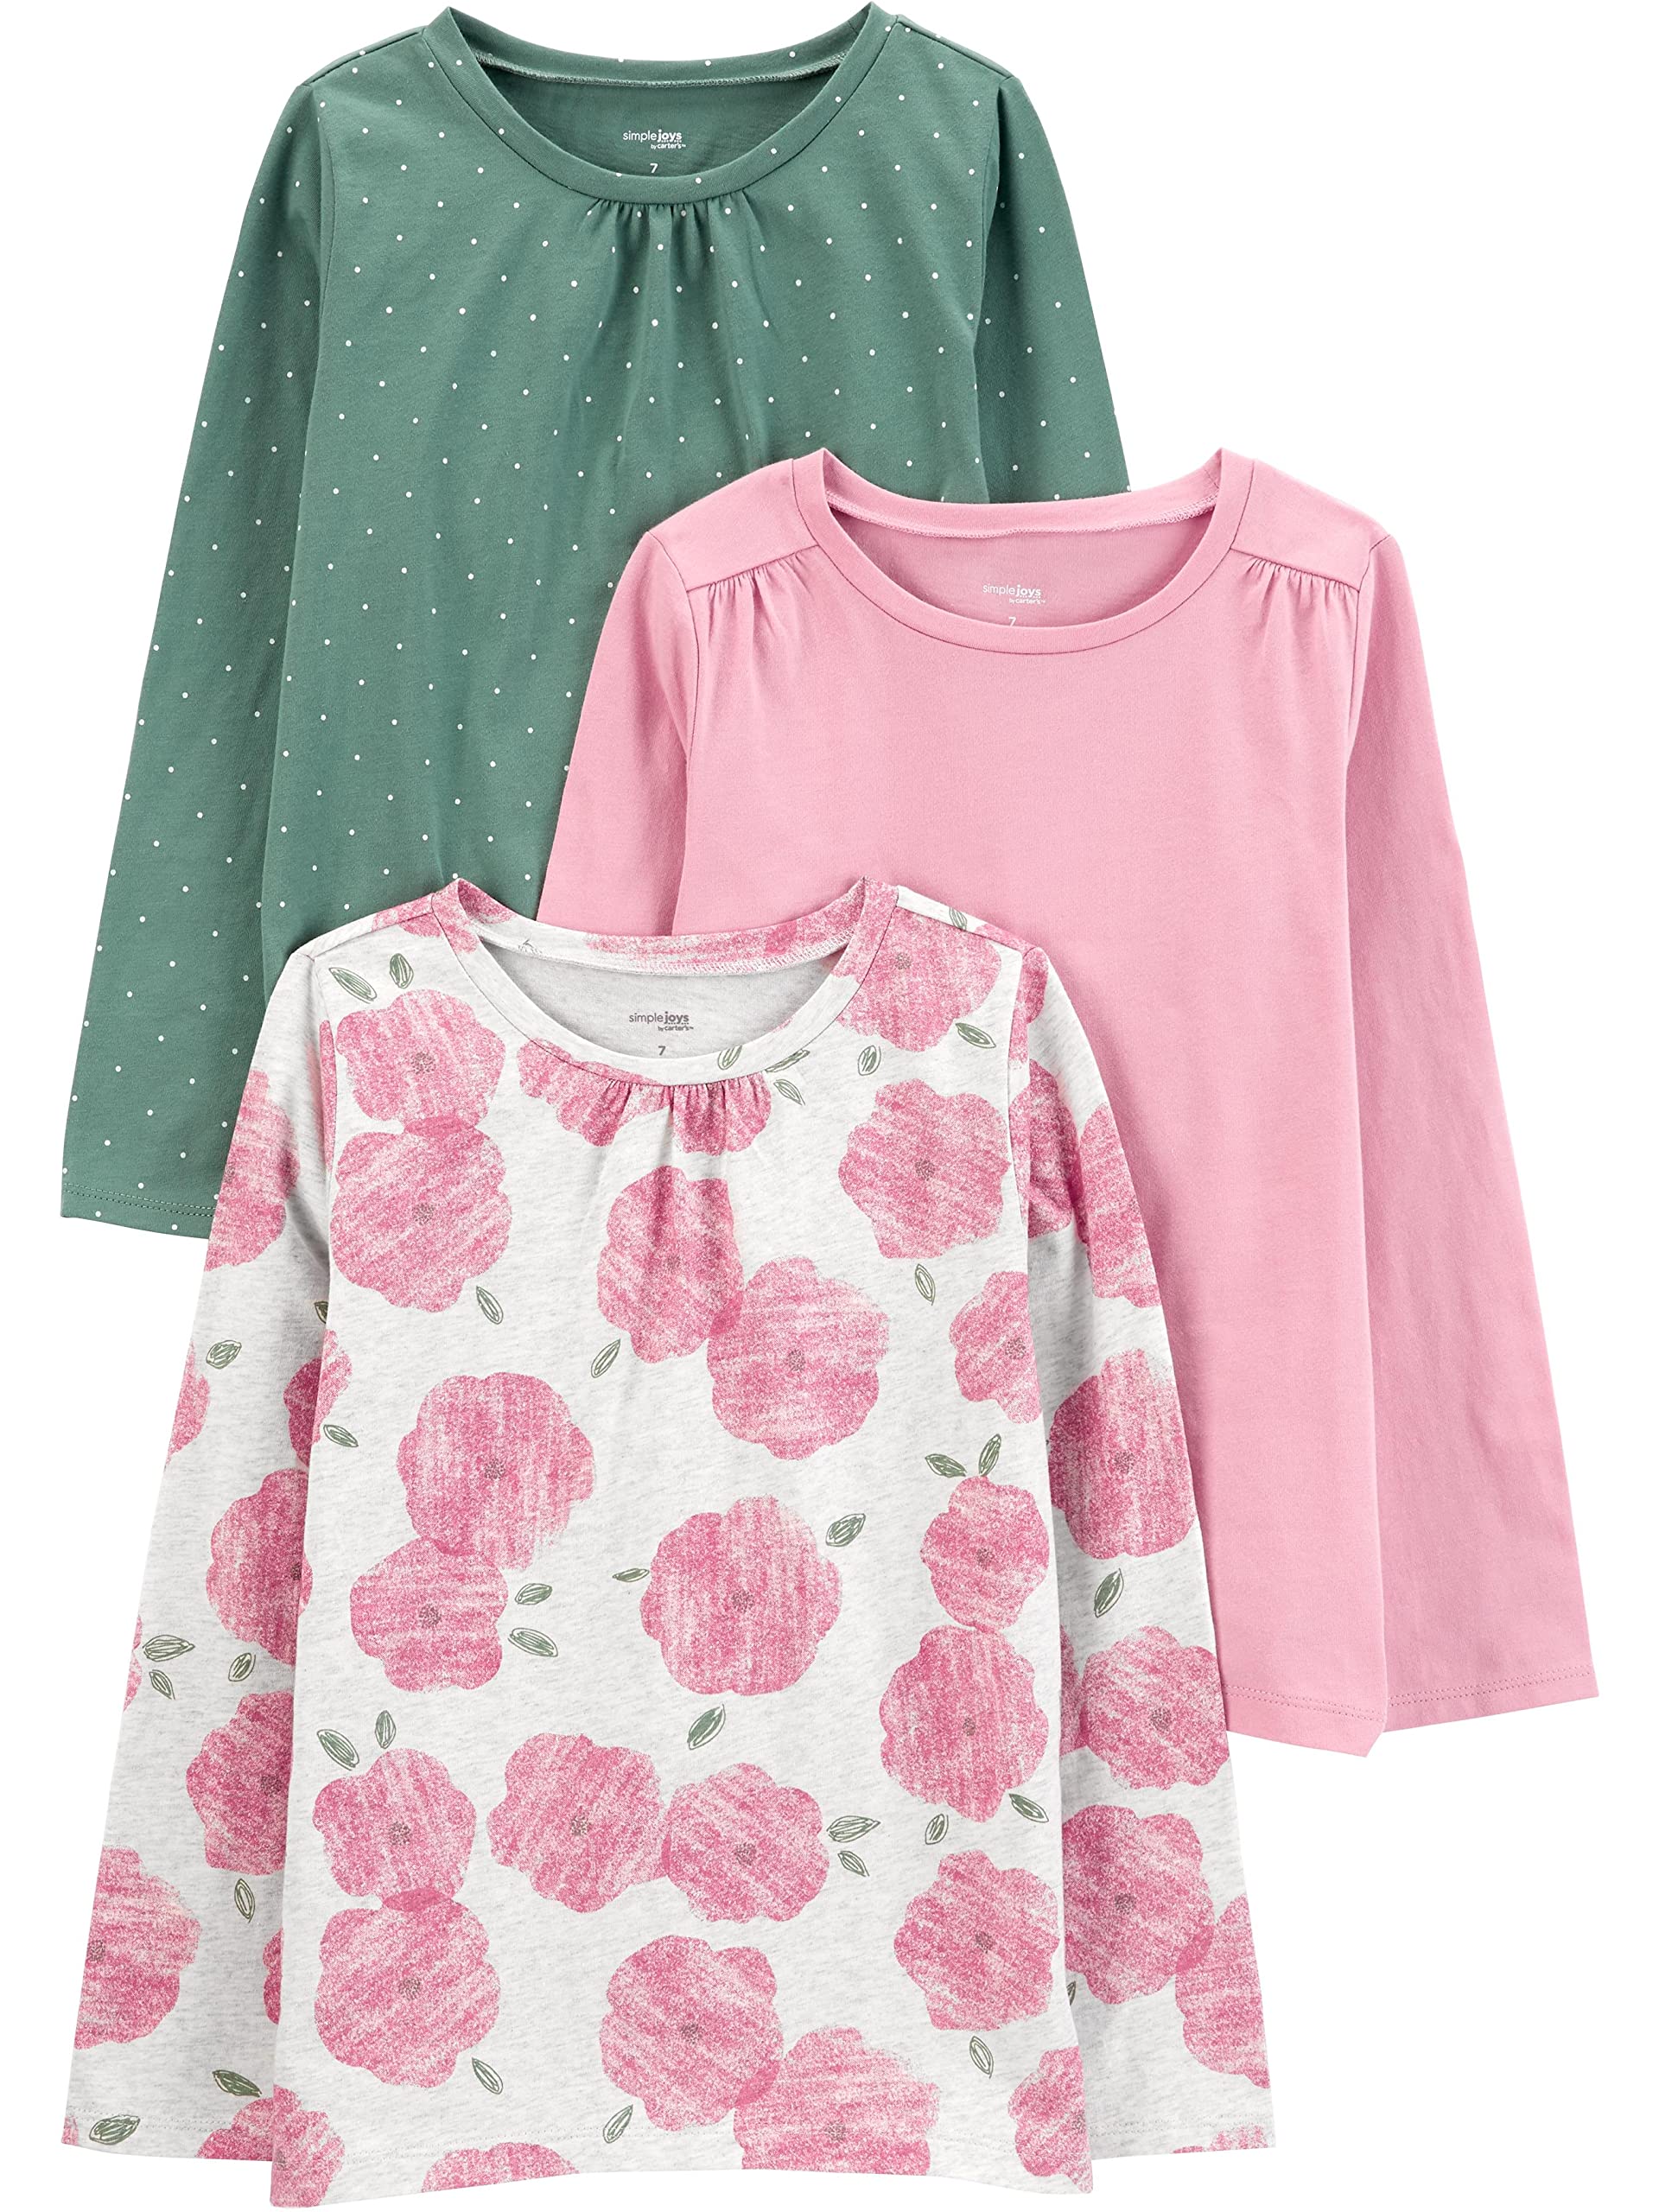 Simple Joys by Carter's Toddlers and Baby Girls' Long-Sleeve Tops, Pack of 3